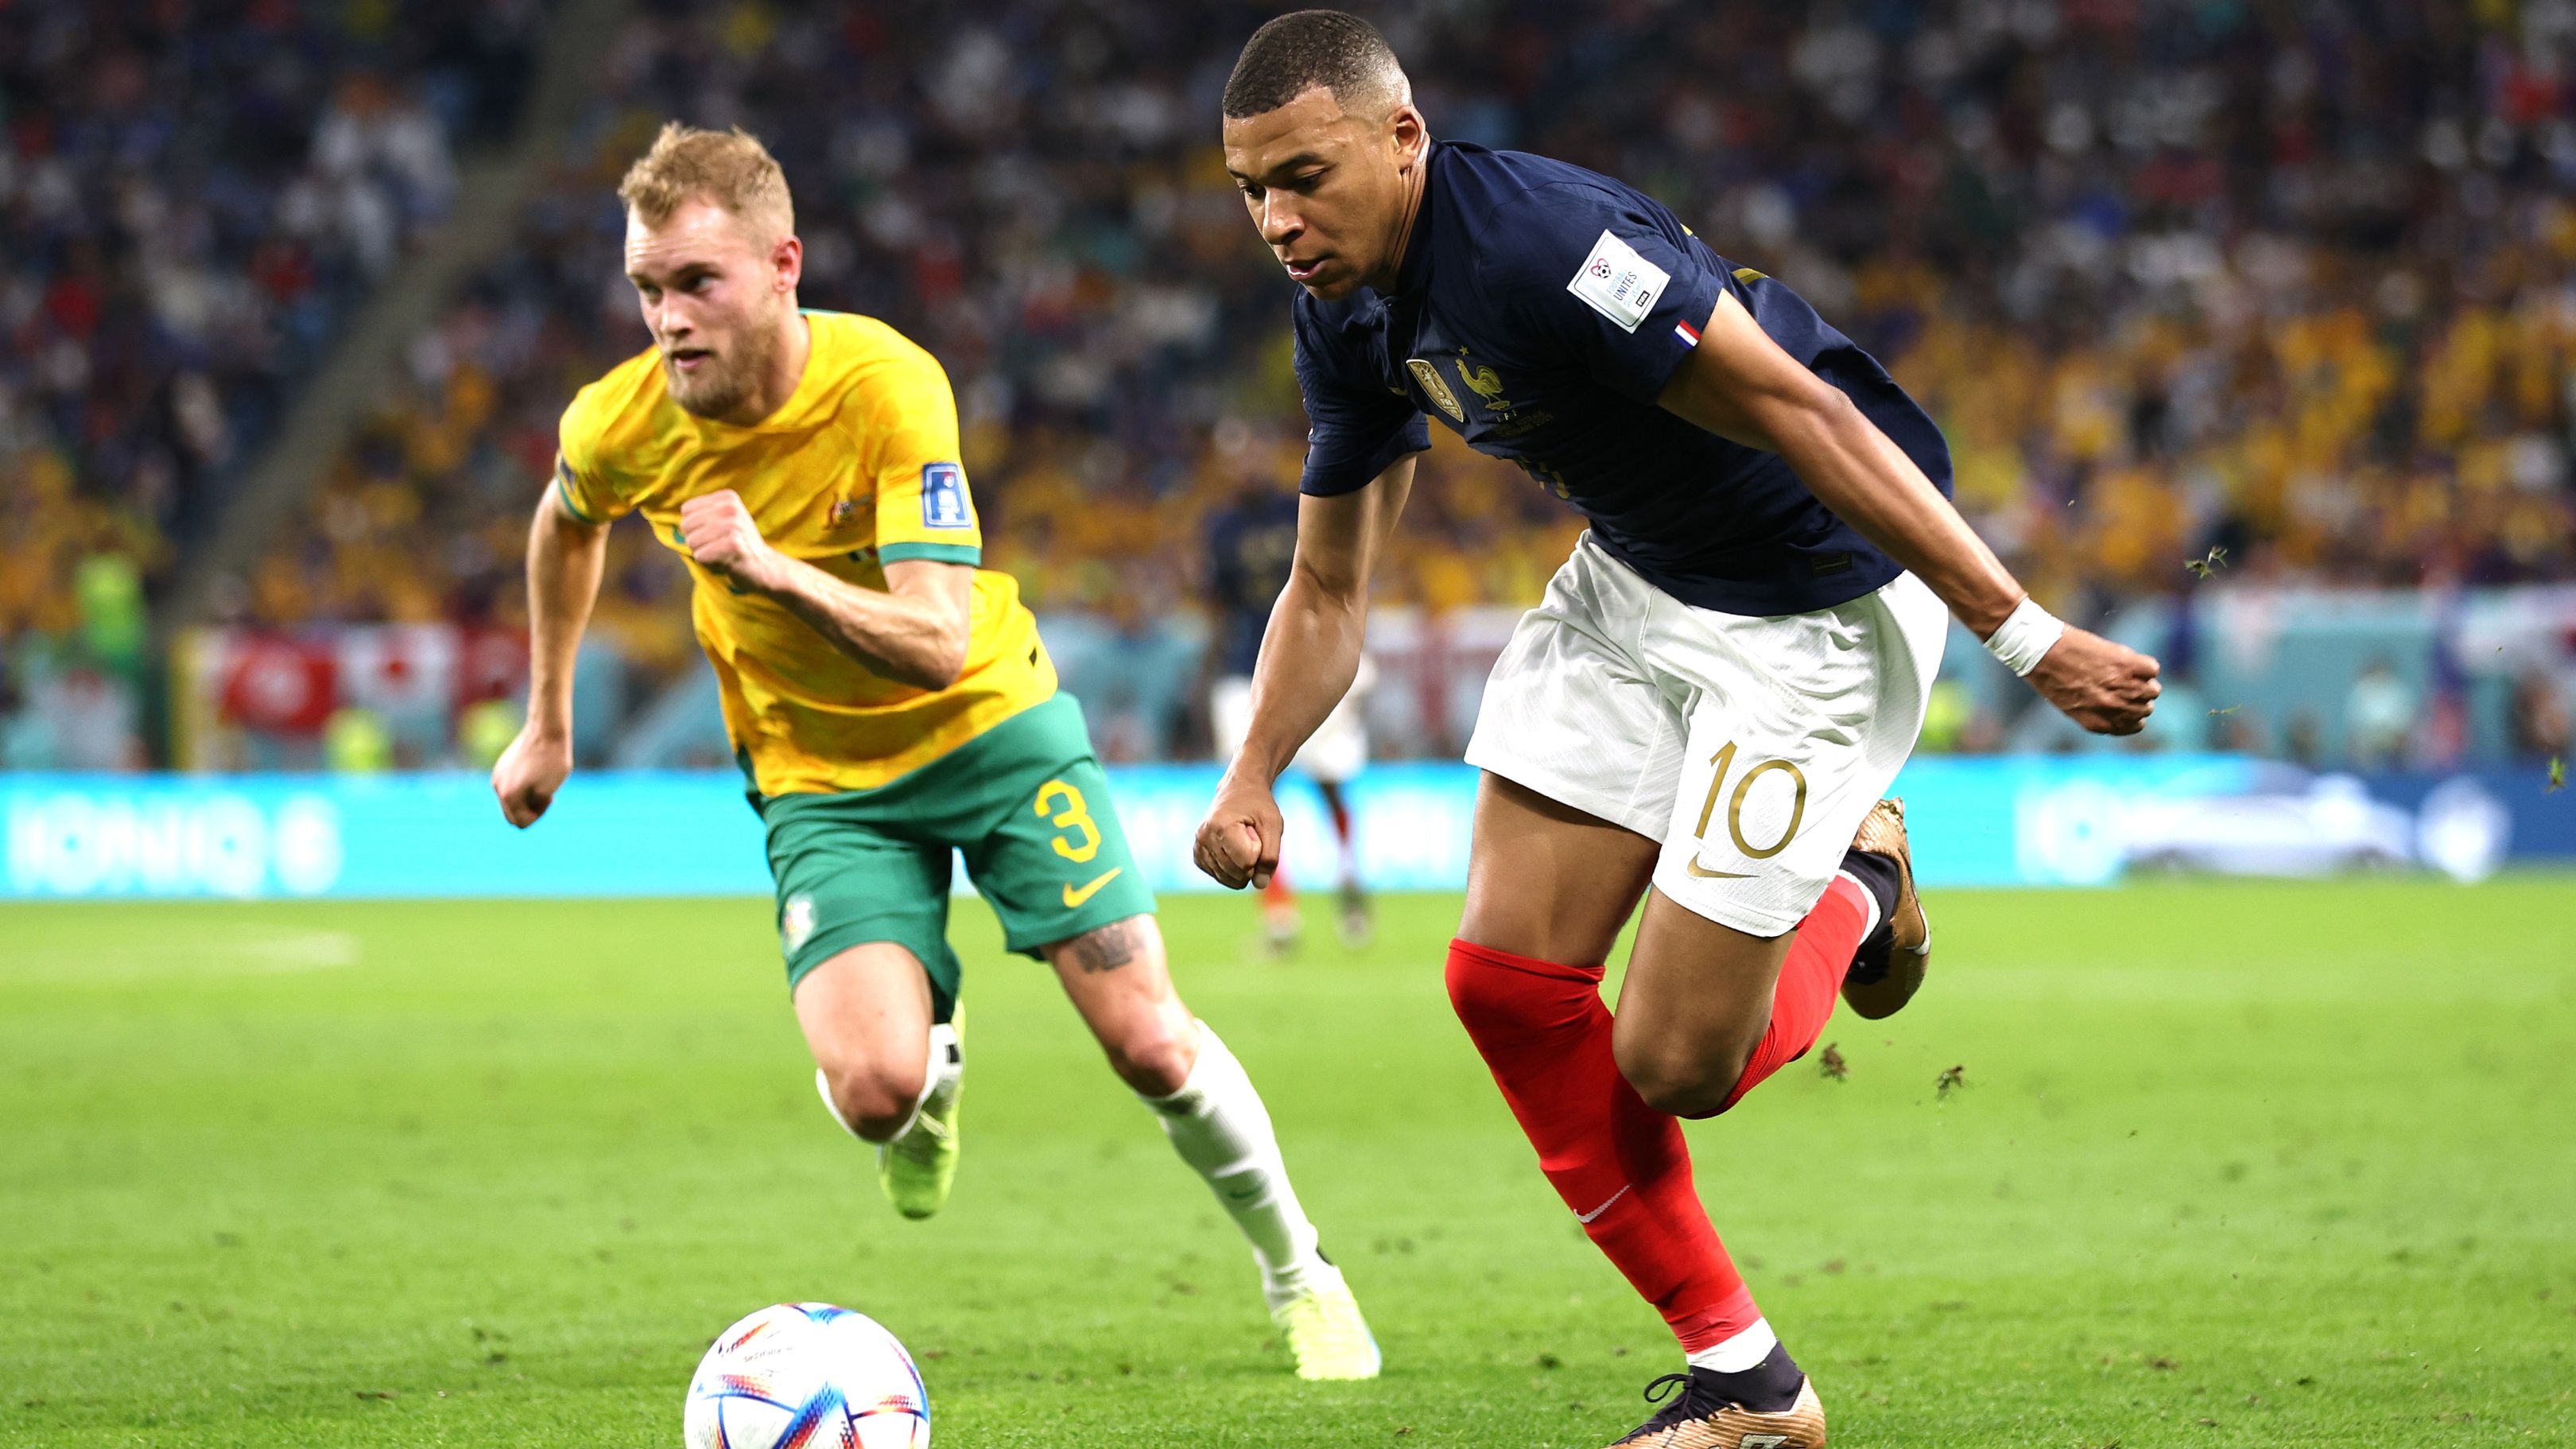 Kylian Mbappe of France controls the ball against Nathaniel Atkinson of Australia.